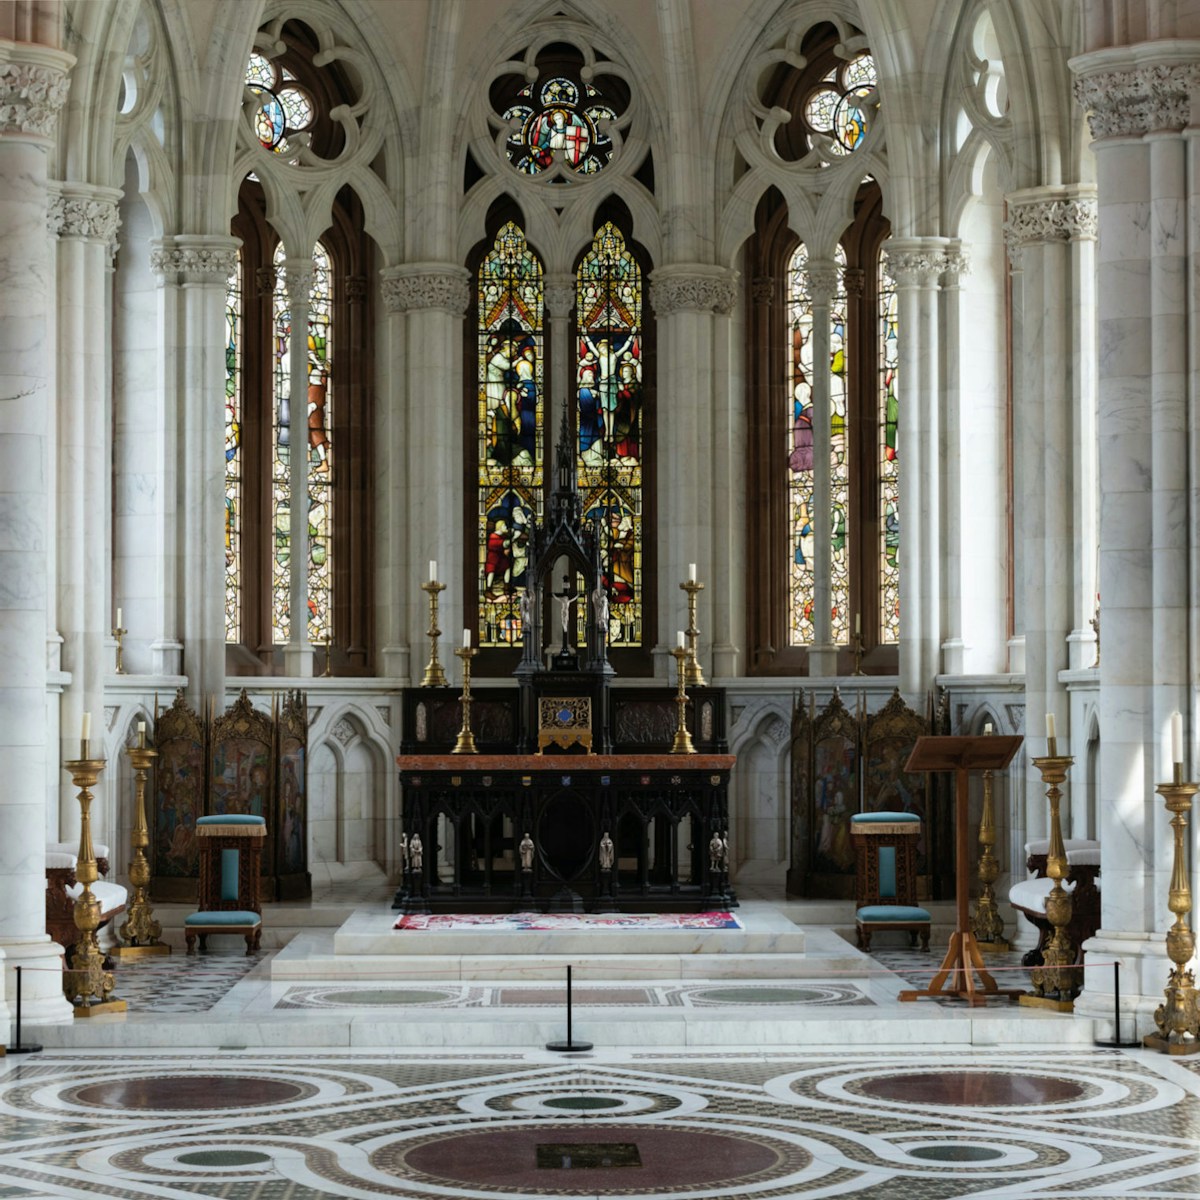 Interior shot of church with stained glass windows.